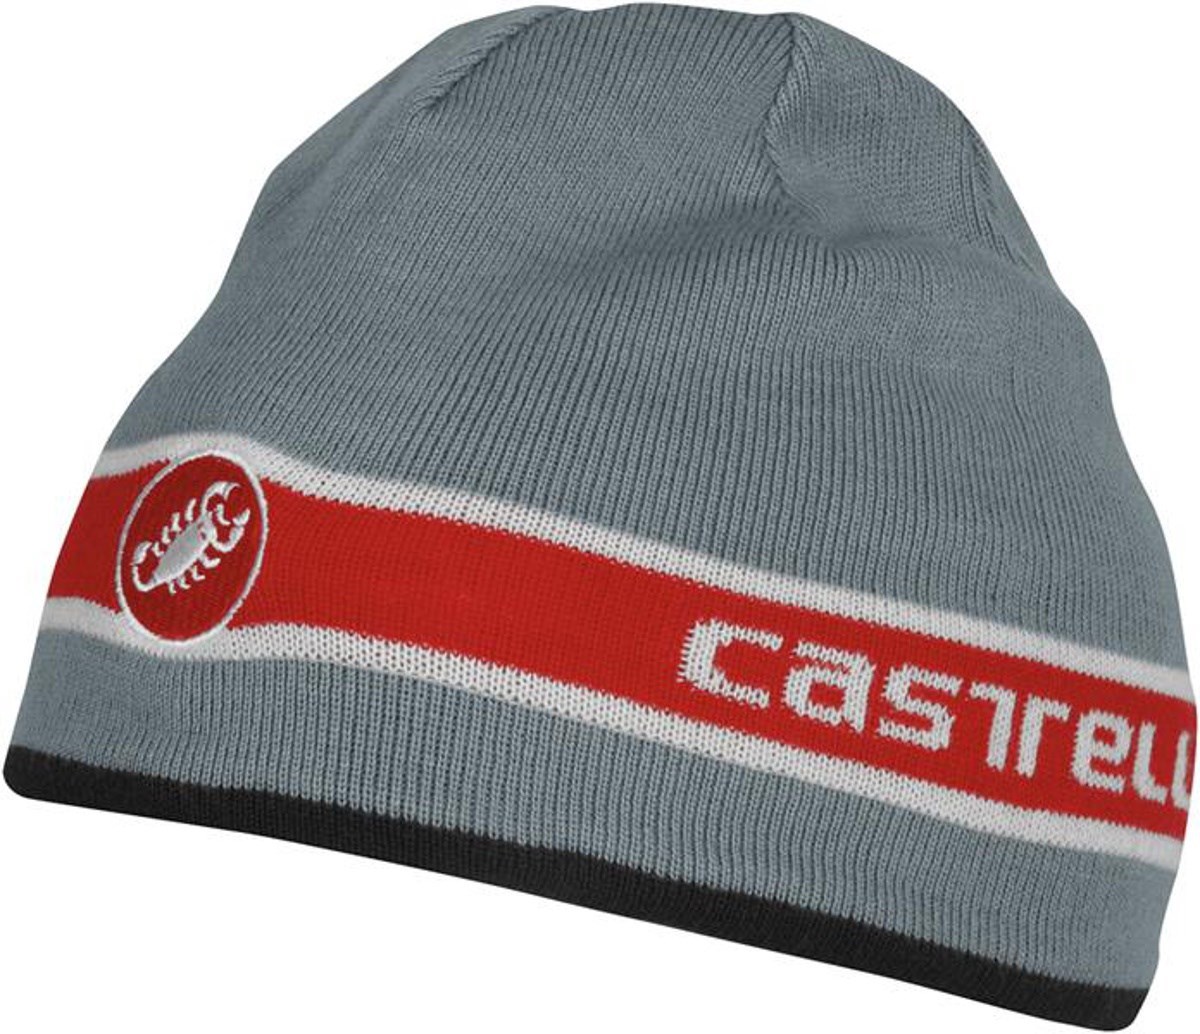 Castelli Ciclocross Reversible Beanie product image